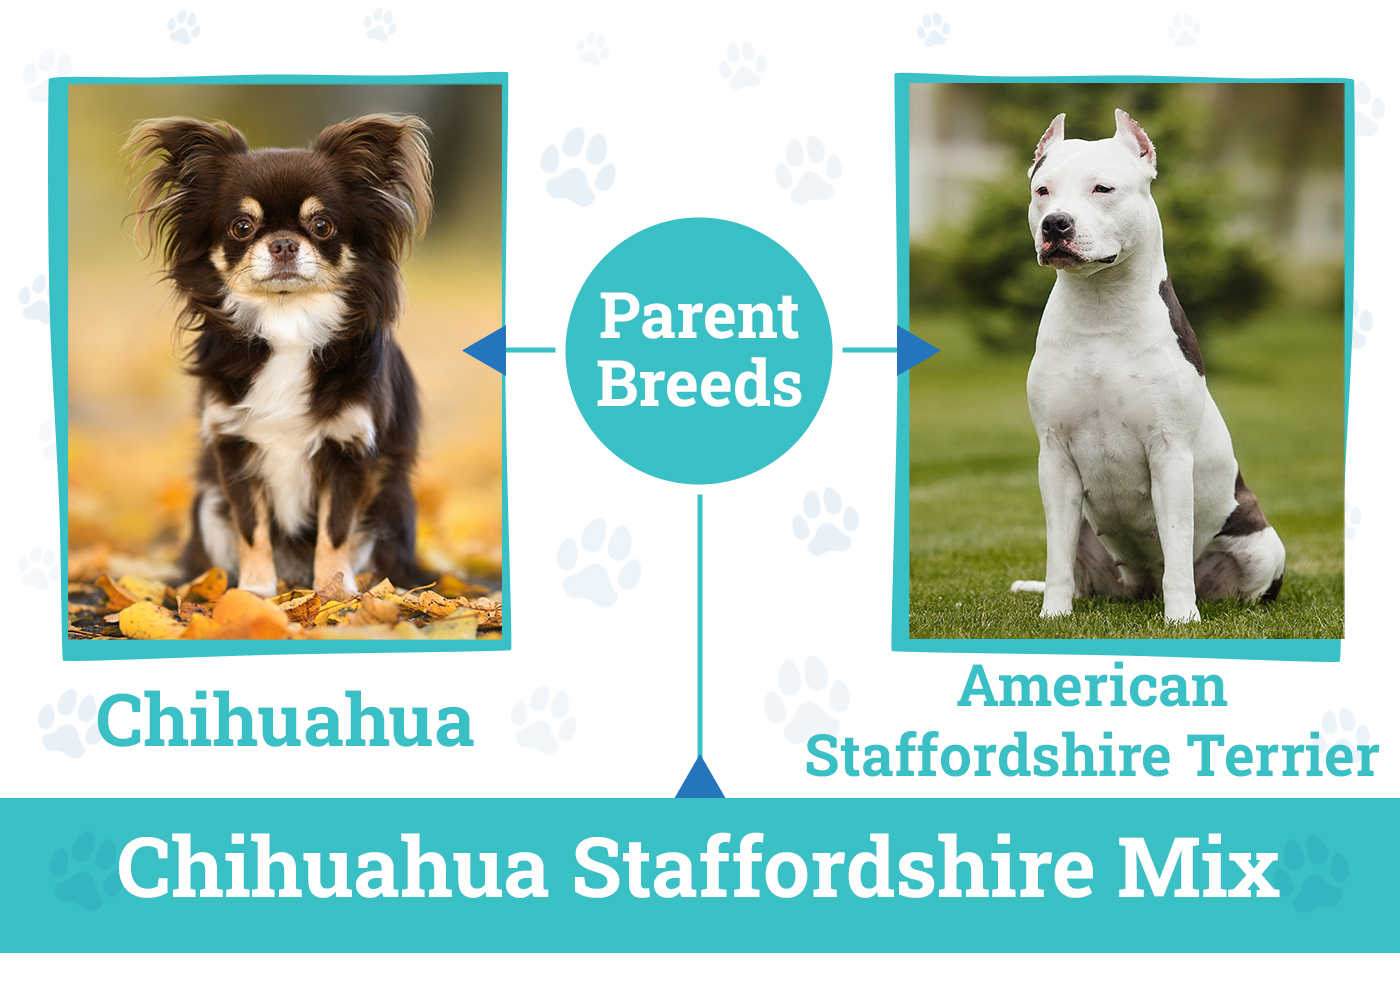 Parent Breeds of the Chihuahua Staffordshire Mix